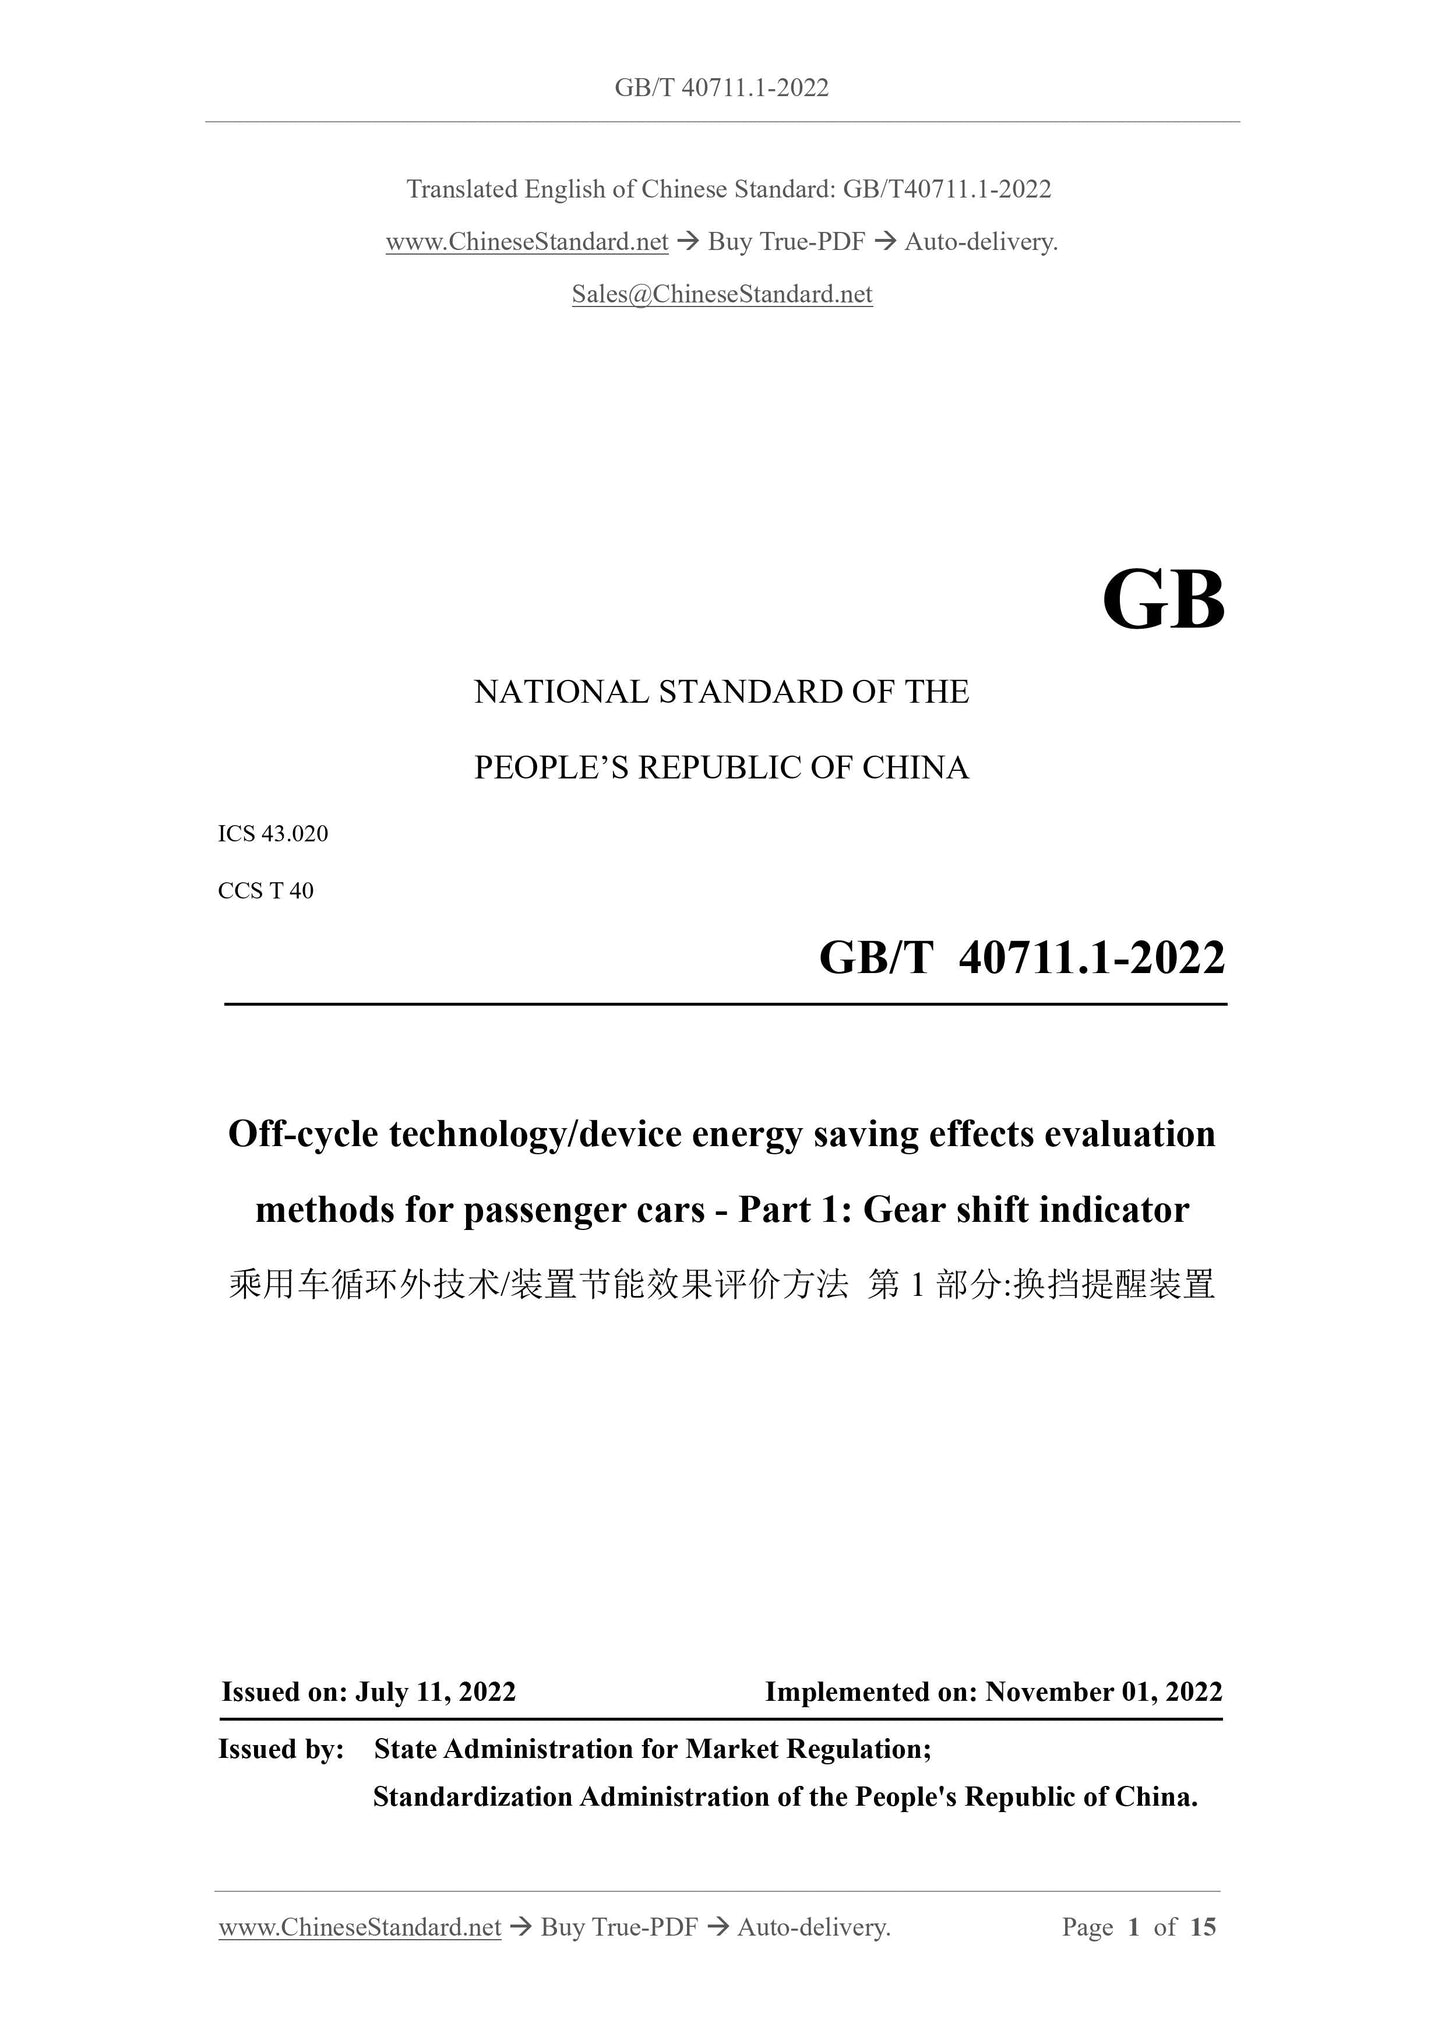 GB/T 40711.1-2022 Page 1